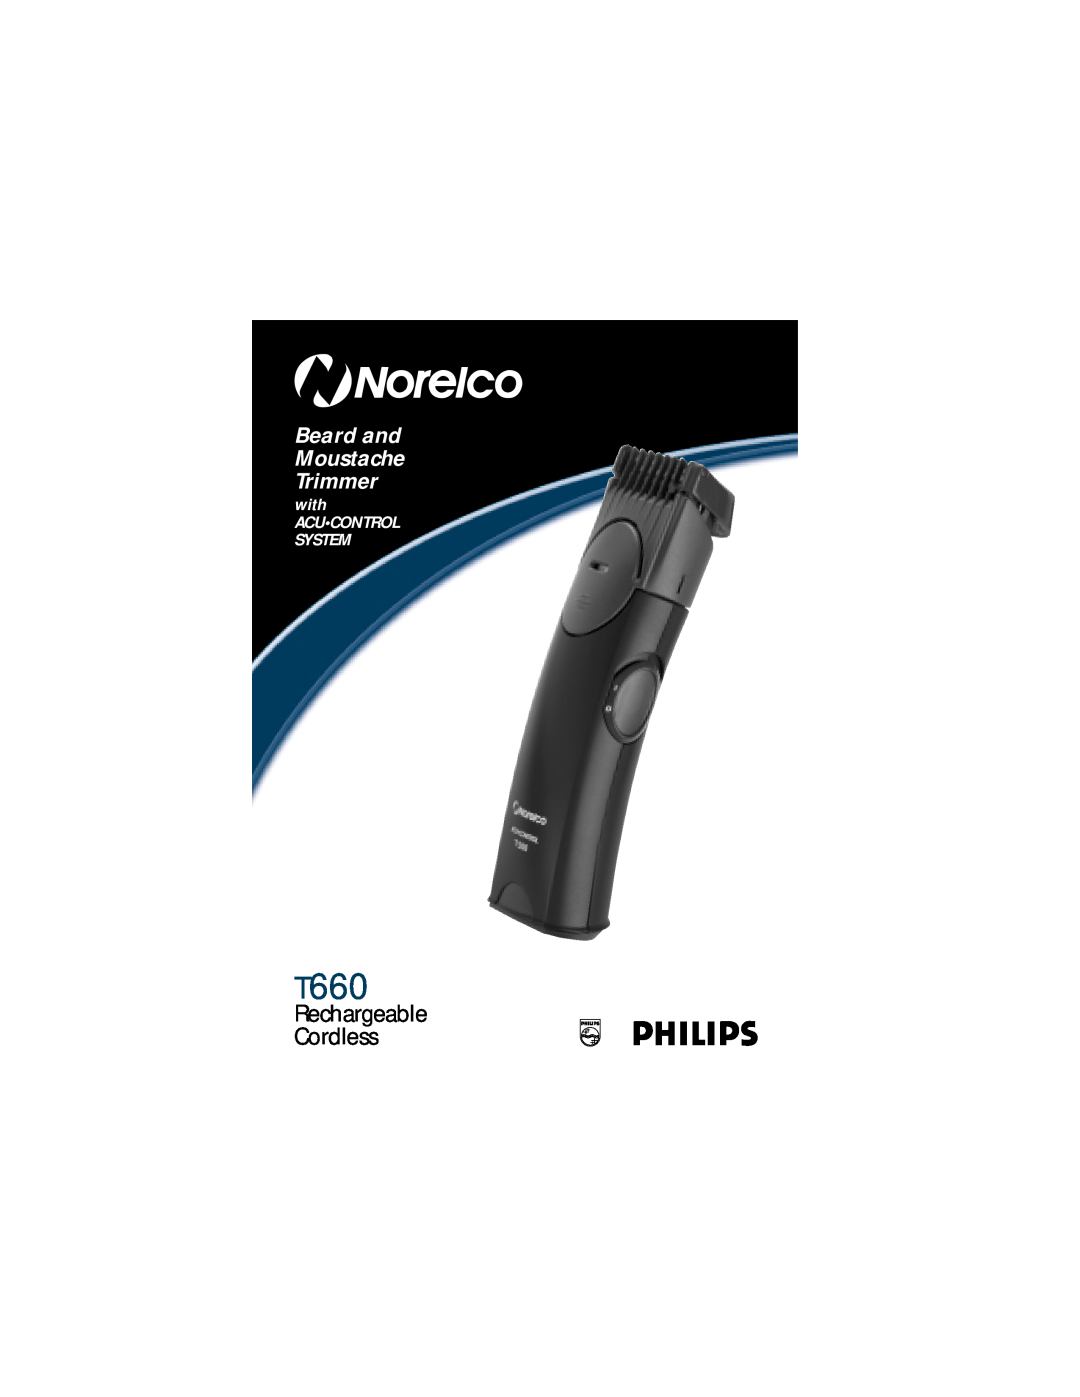 Philips T660 manual RechargeableP CordlessS, Beard and Moustache Trimmer, with, Acucontrol System 